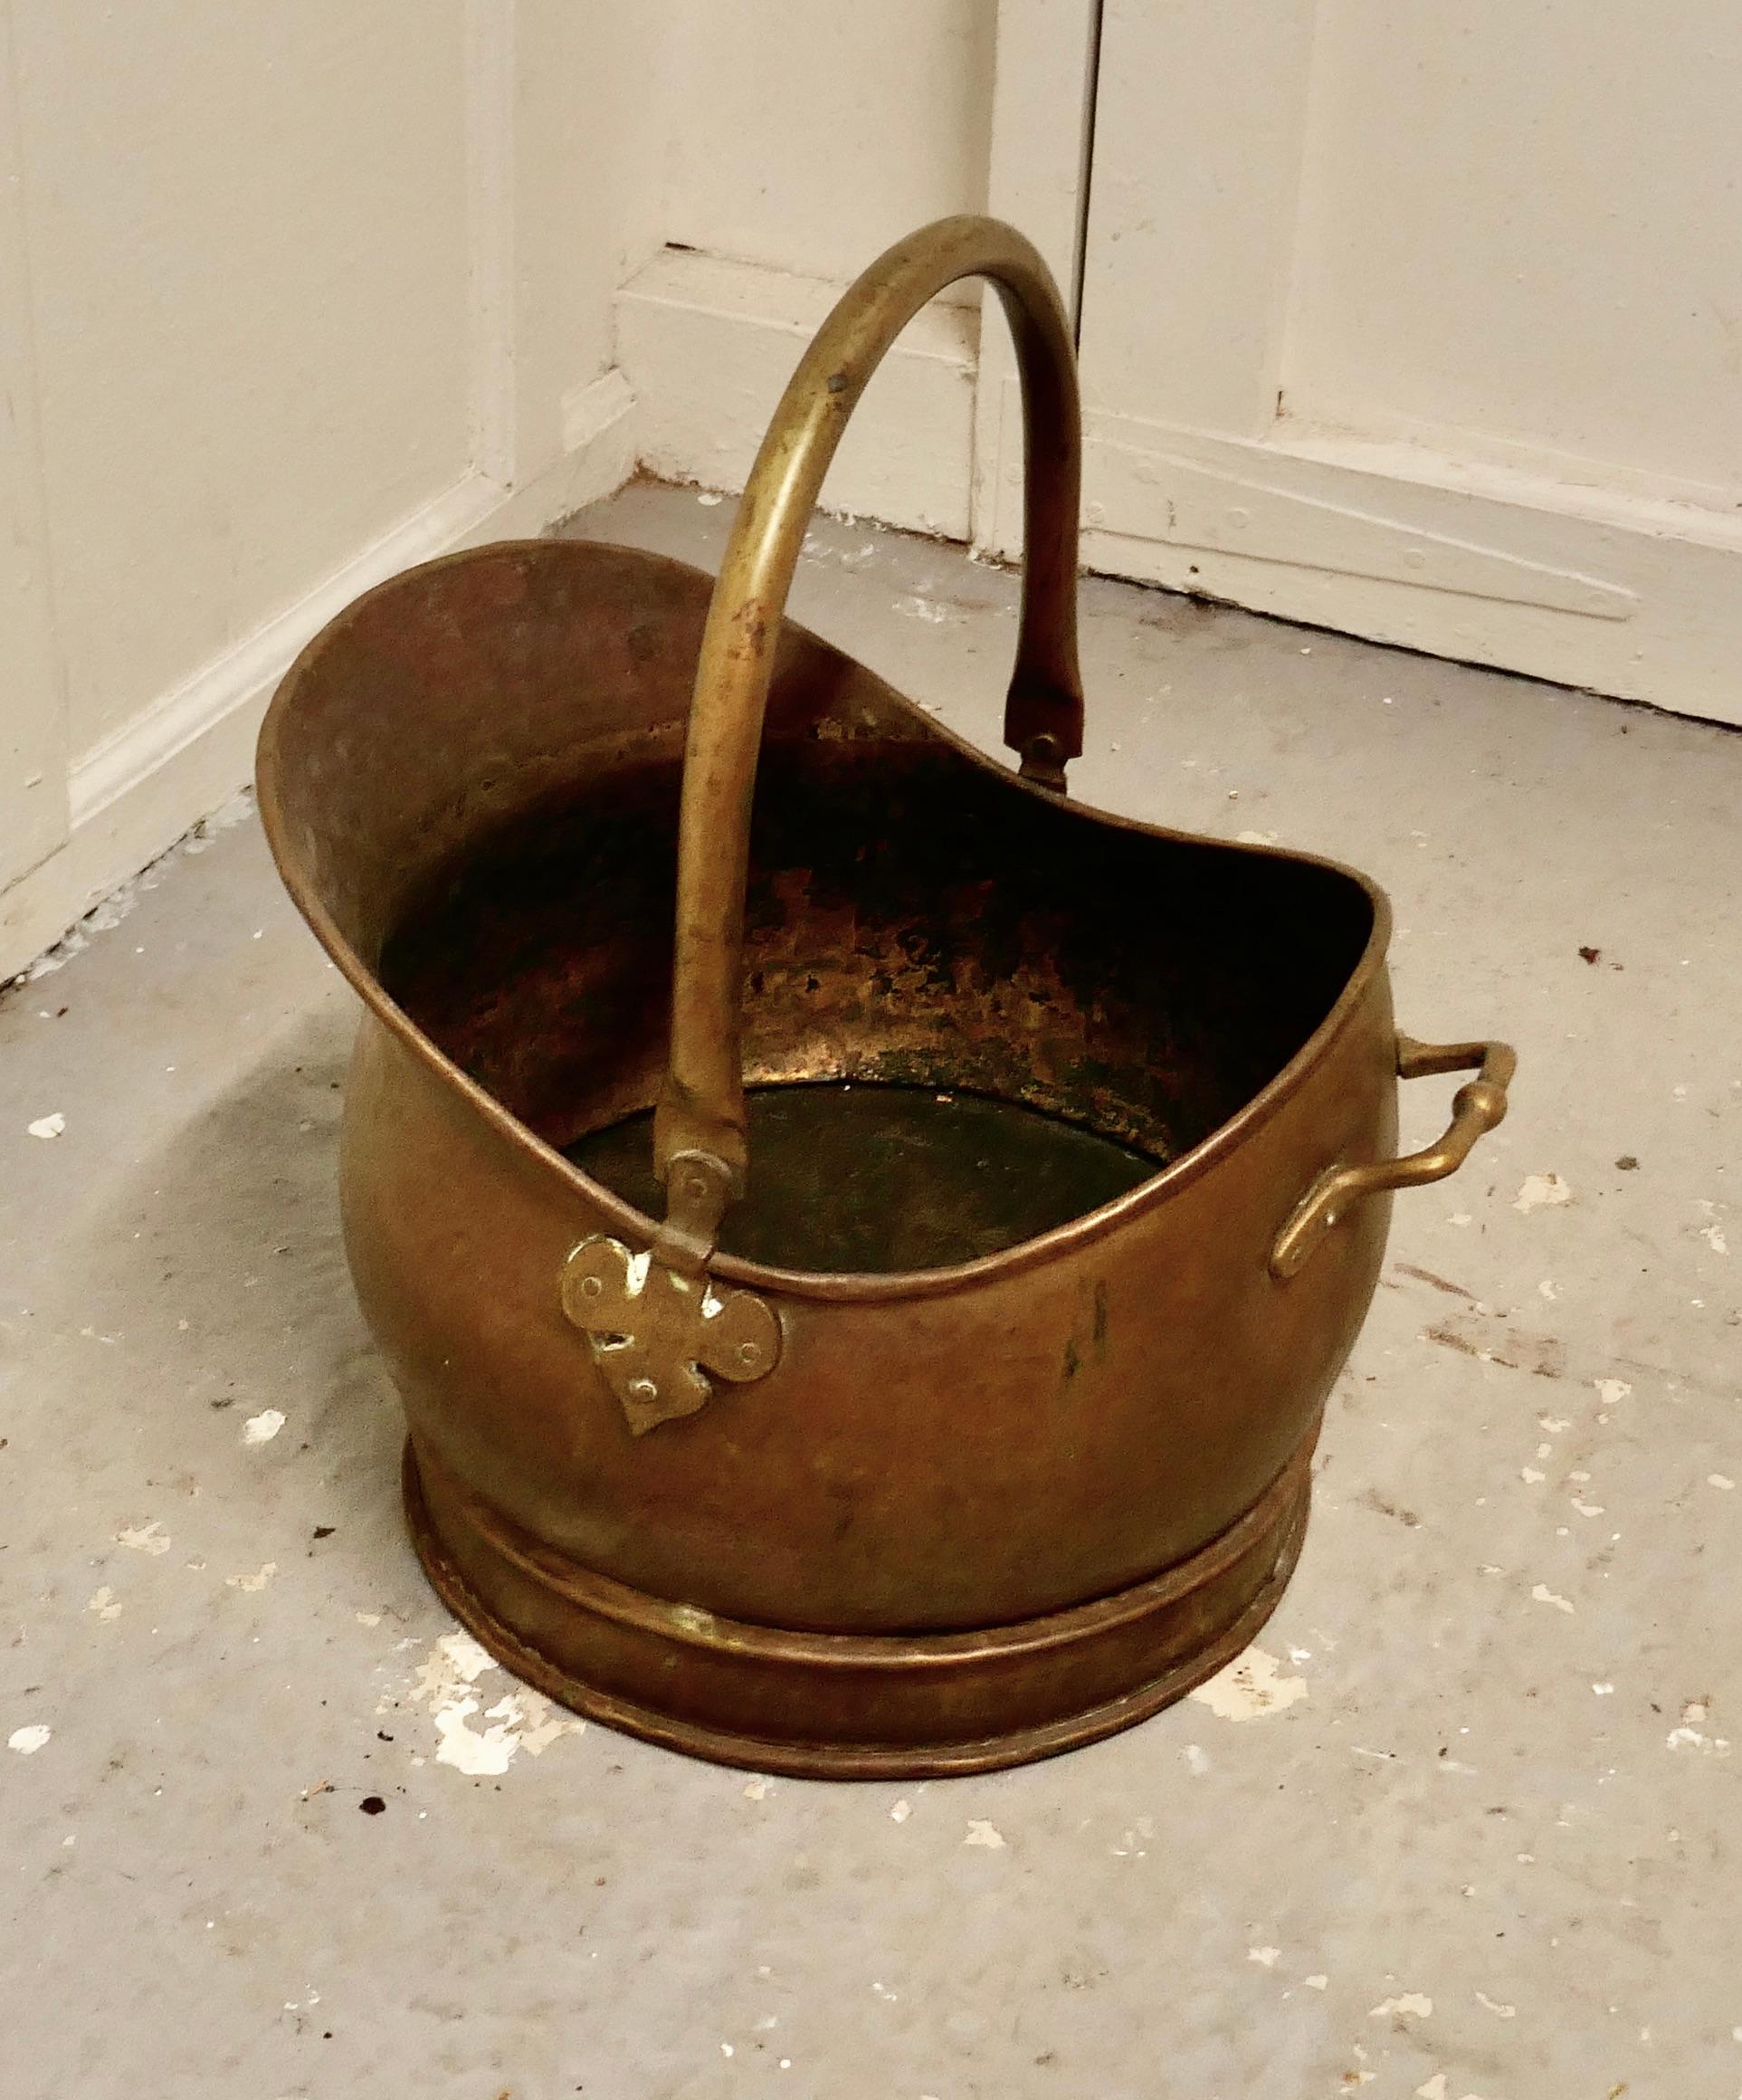 Brass Helmet coal scuttle 

This bucket is a very attractive helmet shape, it is made in beaten Brass with riveted hooped brass handles
The Scuttle is in good used condition, it has a good patina, lots of character and is ready to go to work and